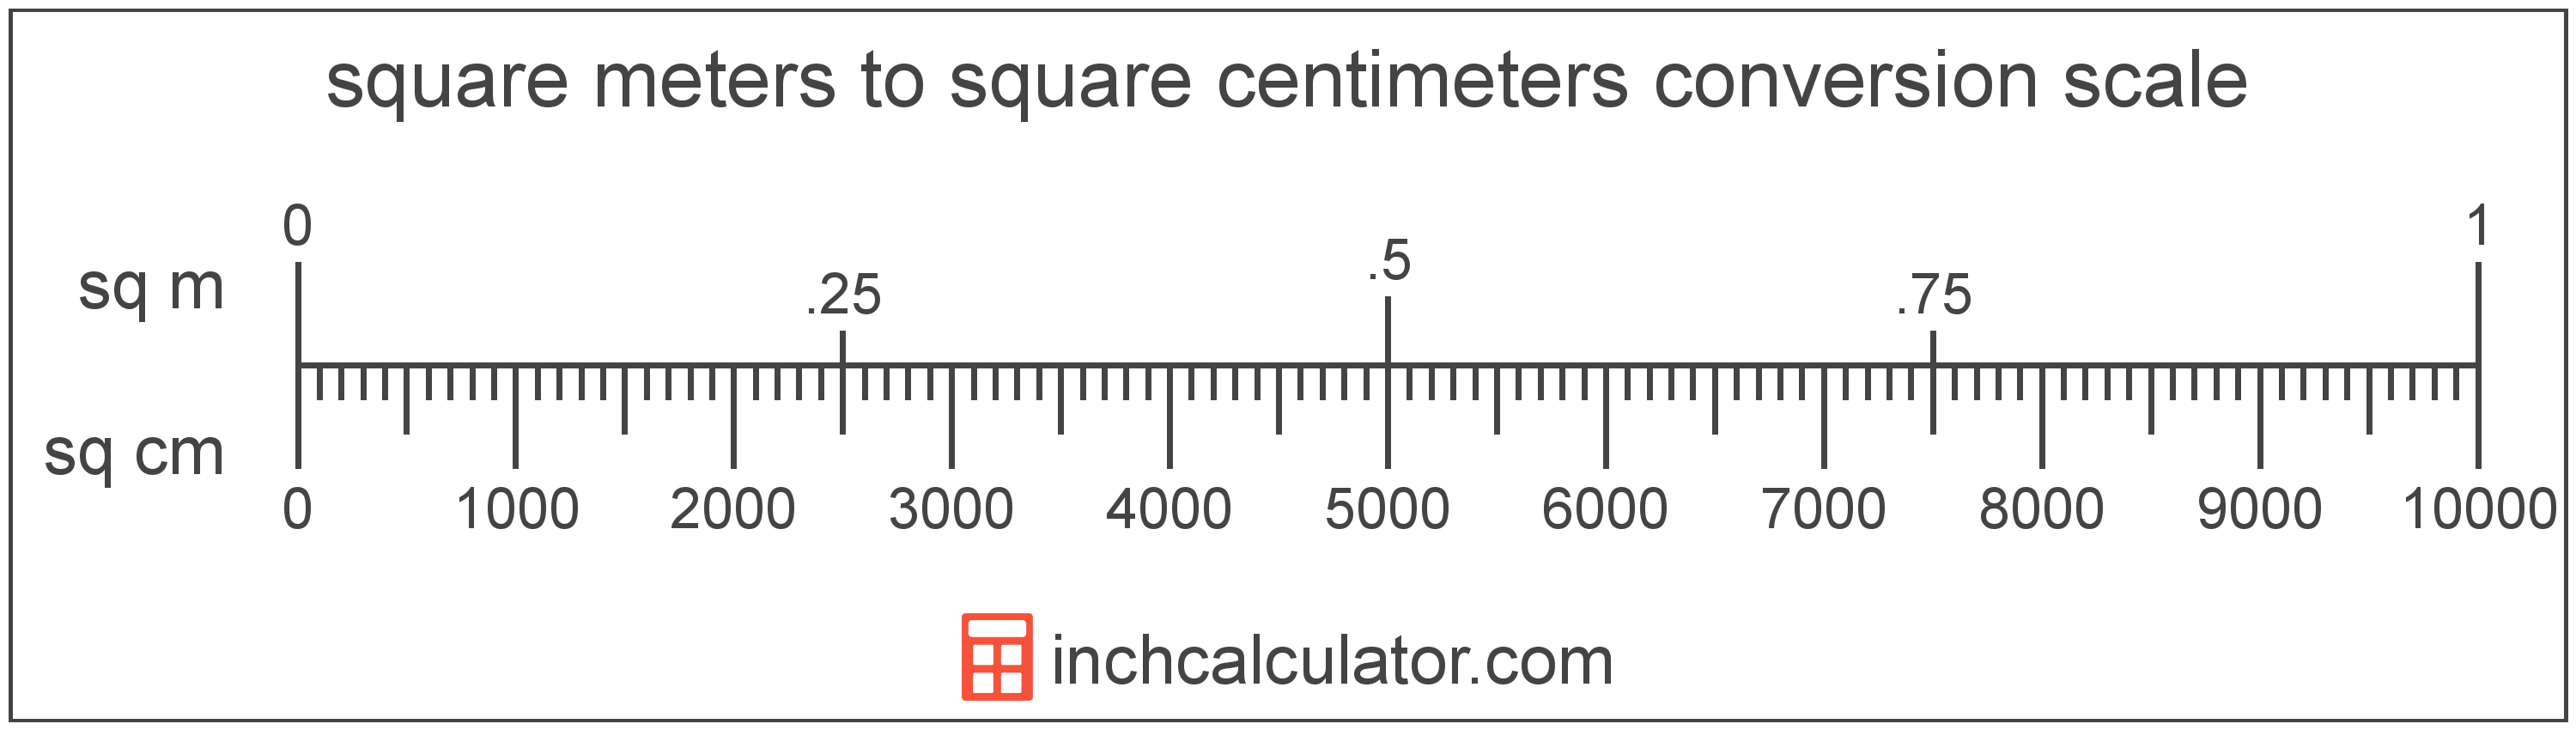 conversion scale showing square meters and equivalent square centimeters area values